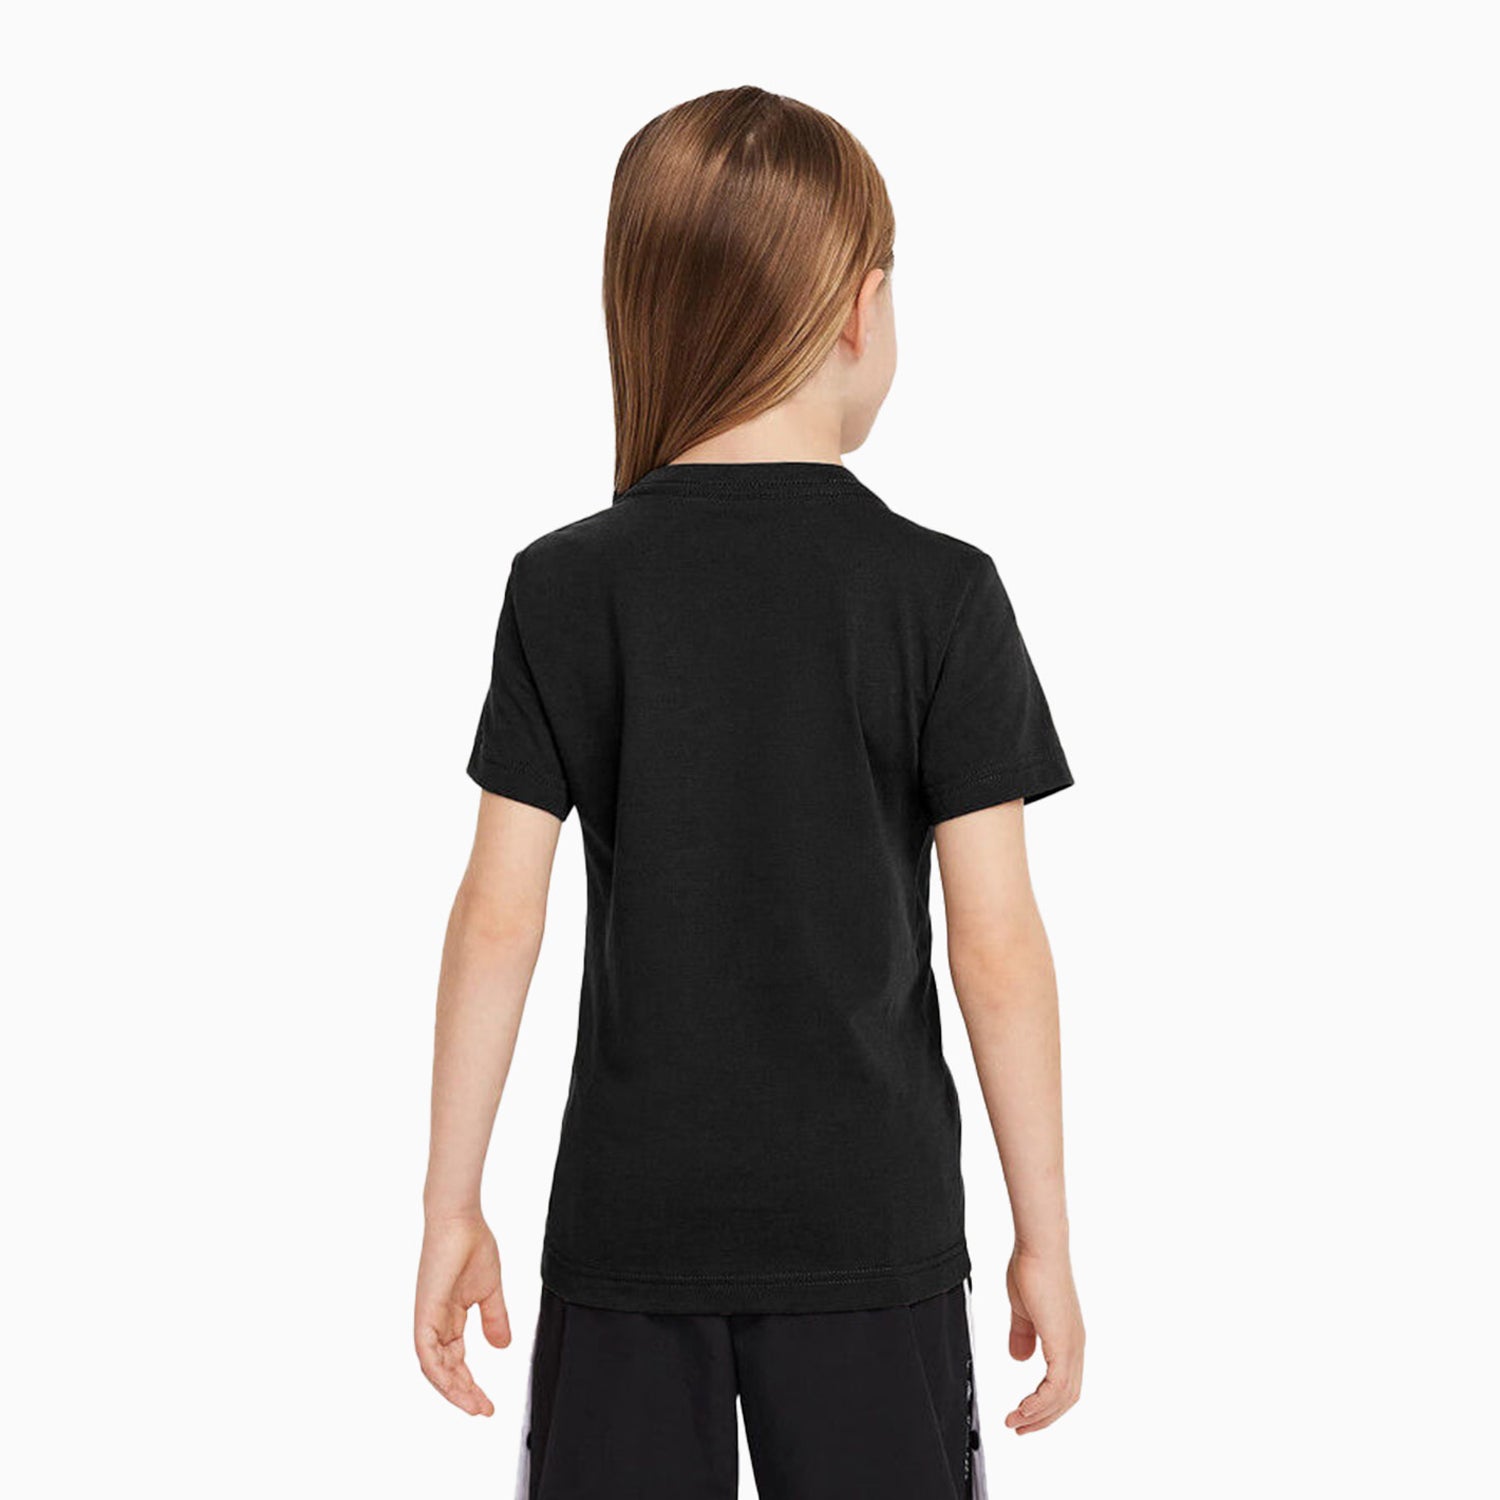 Kid's Sportswear T-Shirt And Shorts Outfit